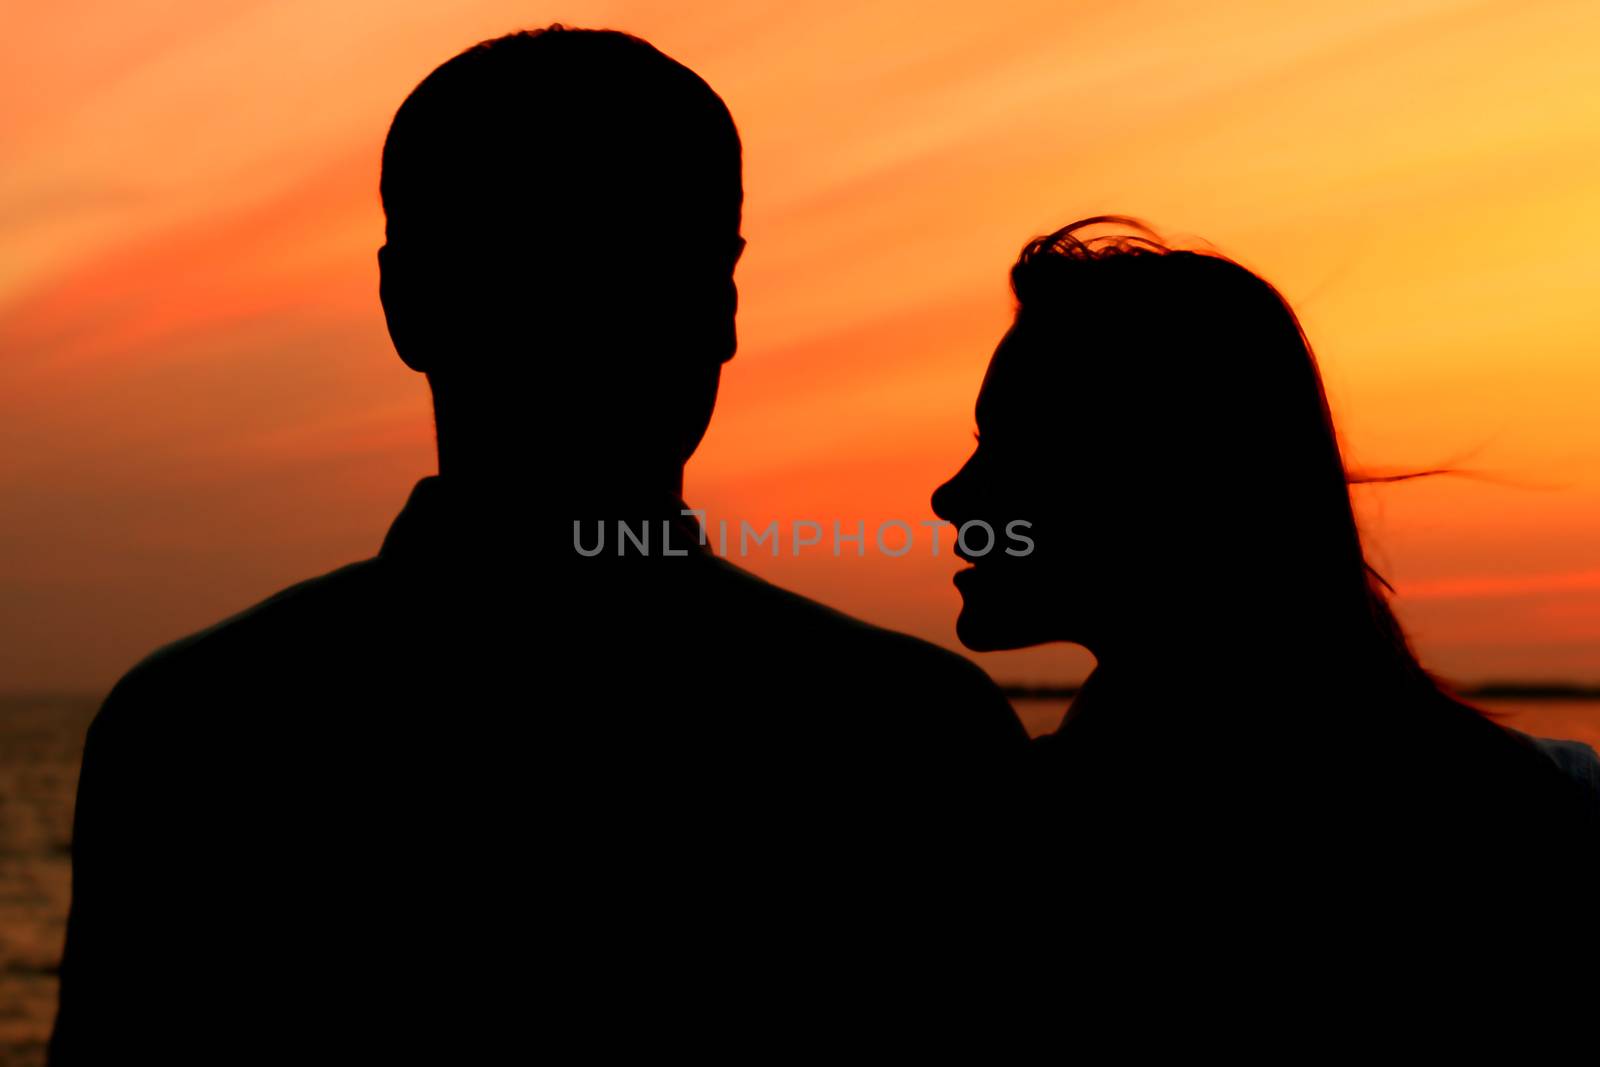 relax on gold sunset  romance flirt of two person on vacation